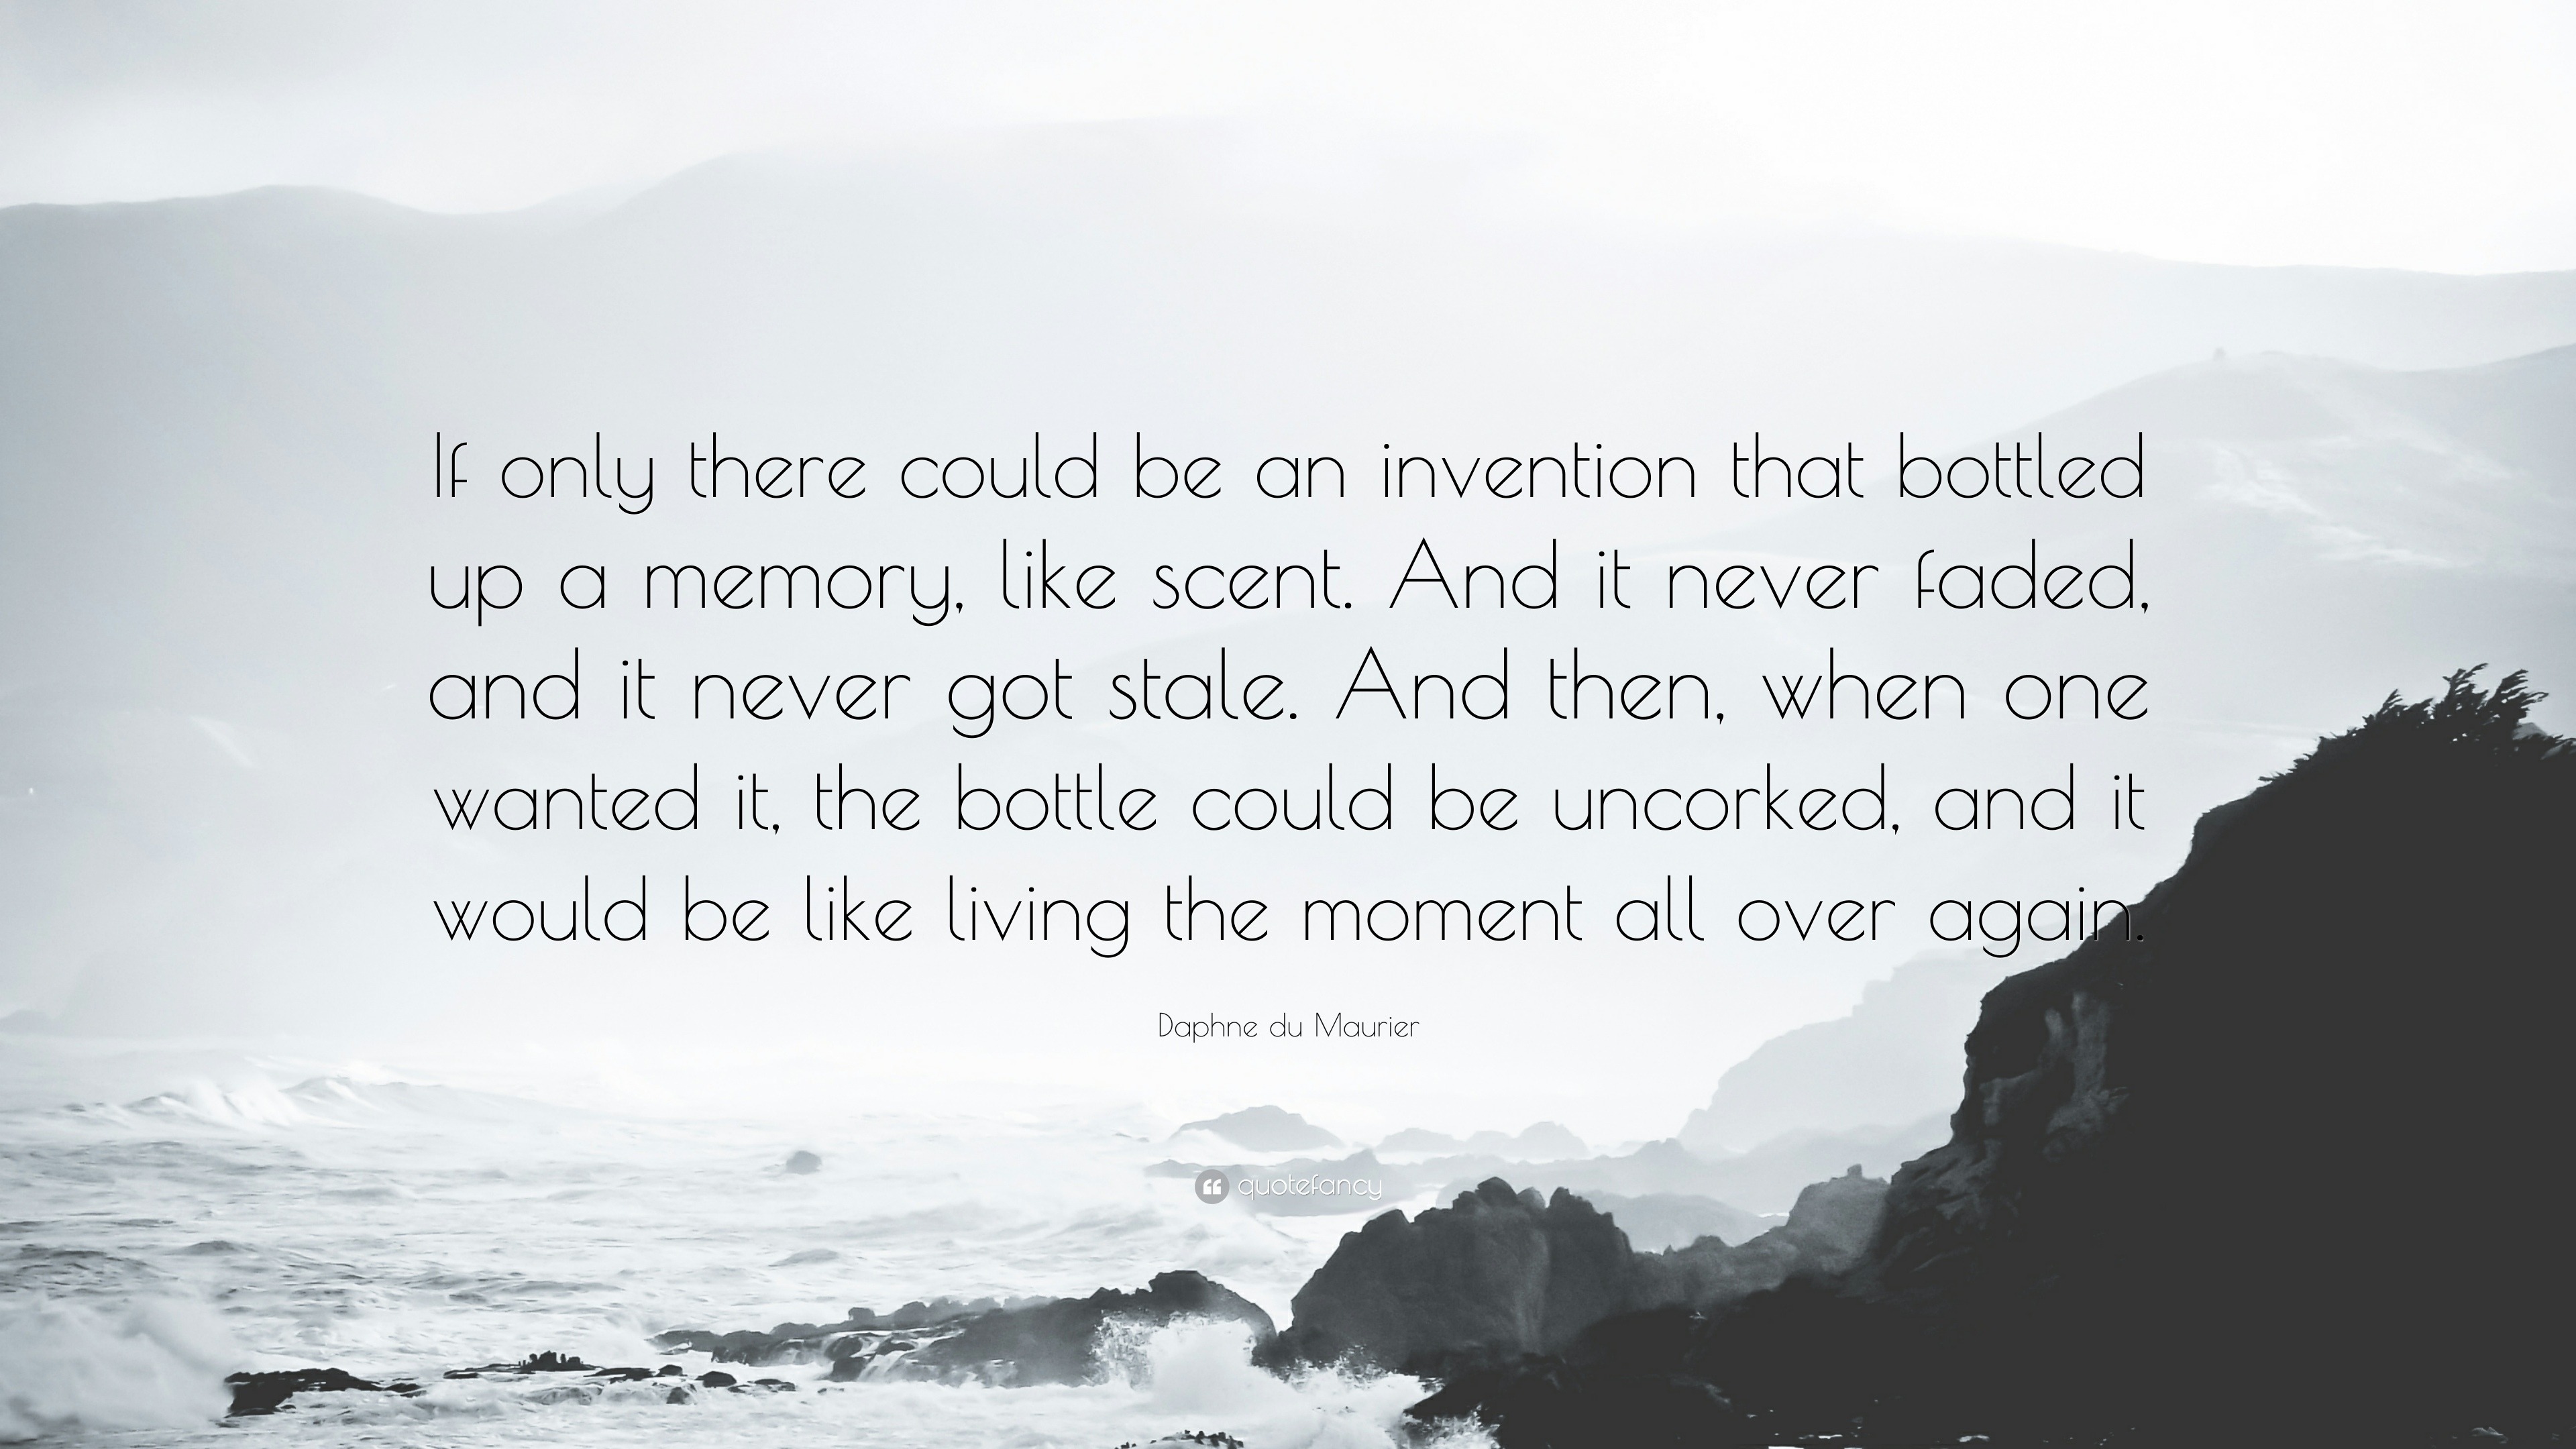 Daphne du Maurier Quote: “If only there could be an invention that